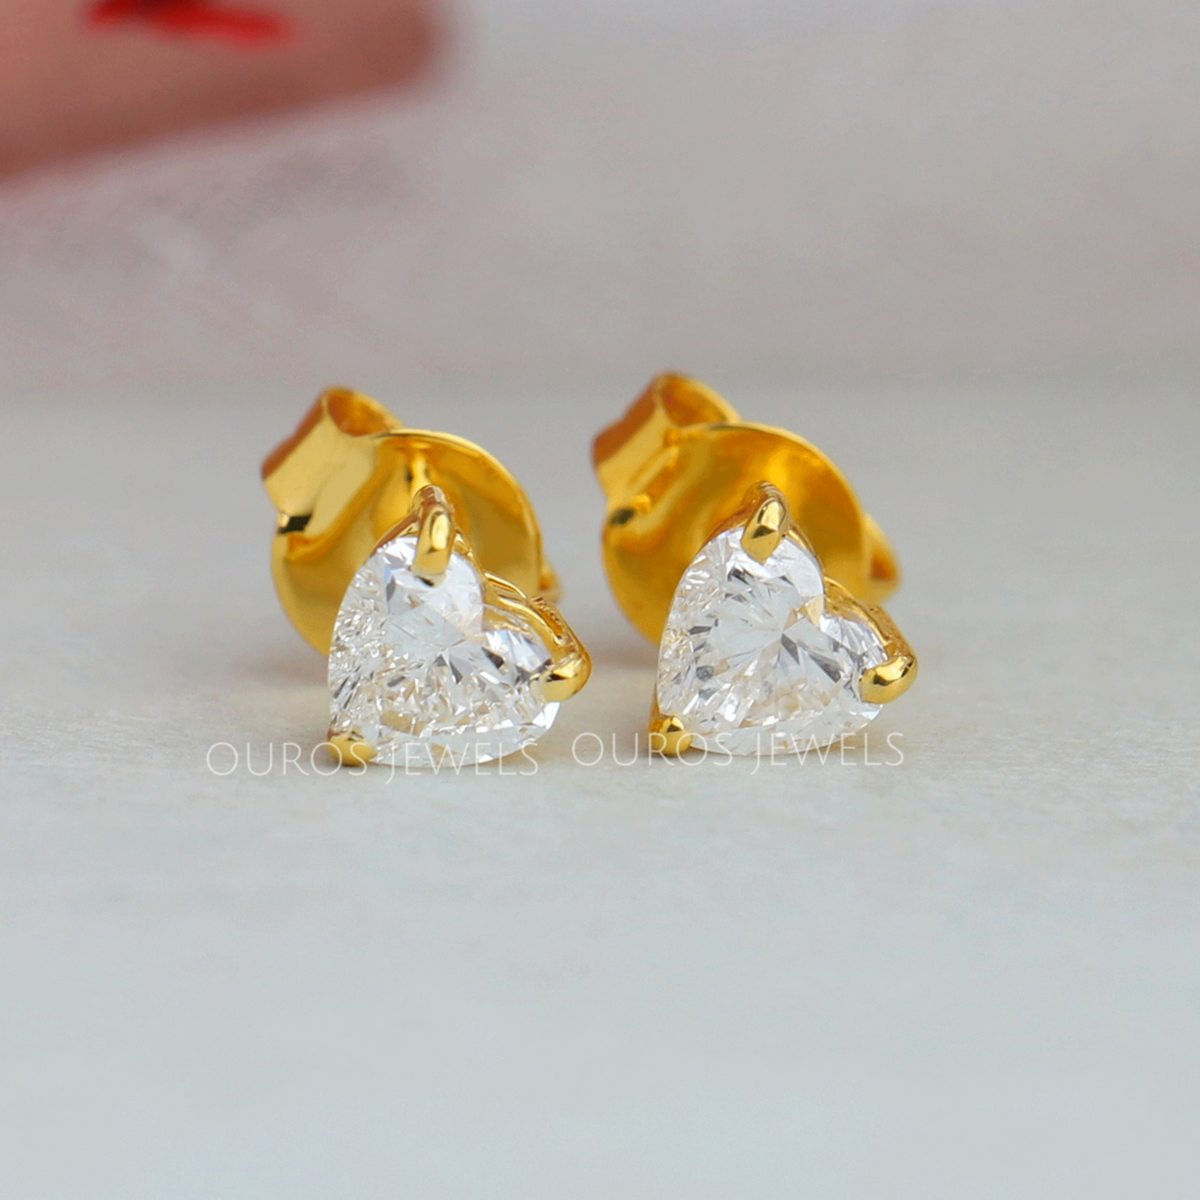 Buy 14K Baby Earrings, Baby Girl First Earrings, Real Diamond Earrings,  14kt Gold Diamond Earrings, Diamond Studs, Real 14kt Tiny Studs, 0.10 Ct  Online in India - Etsy